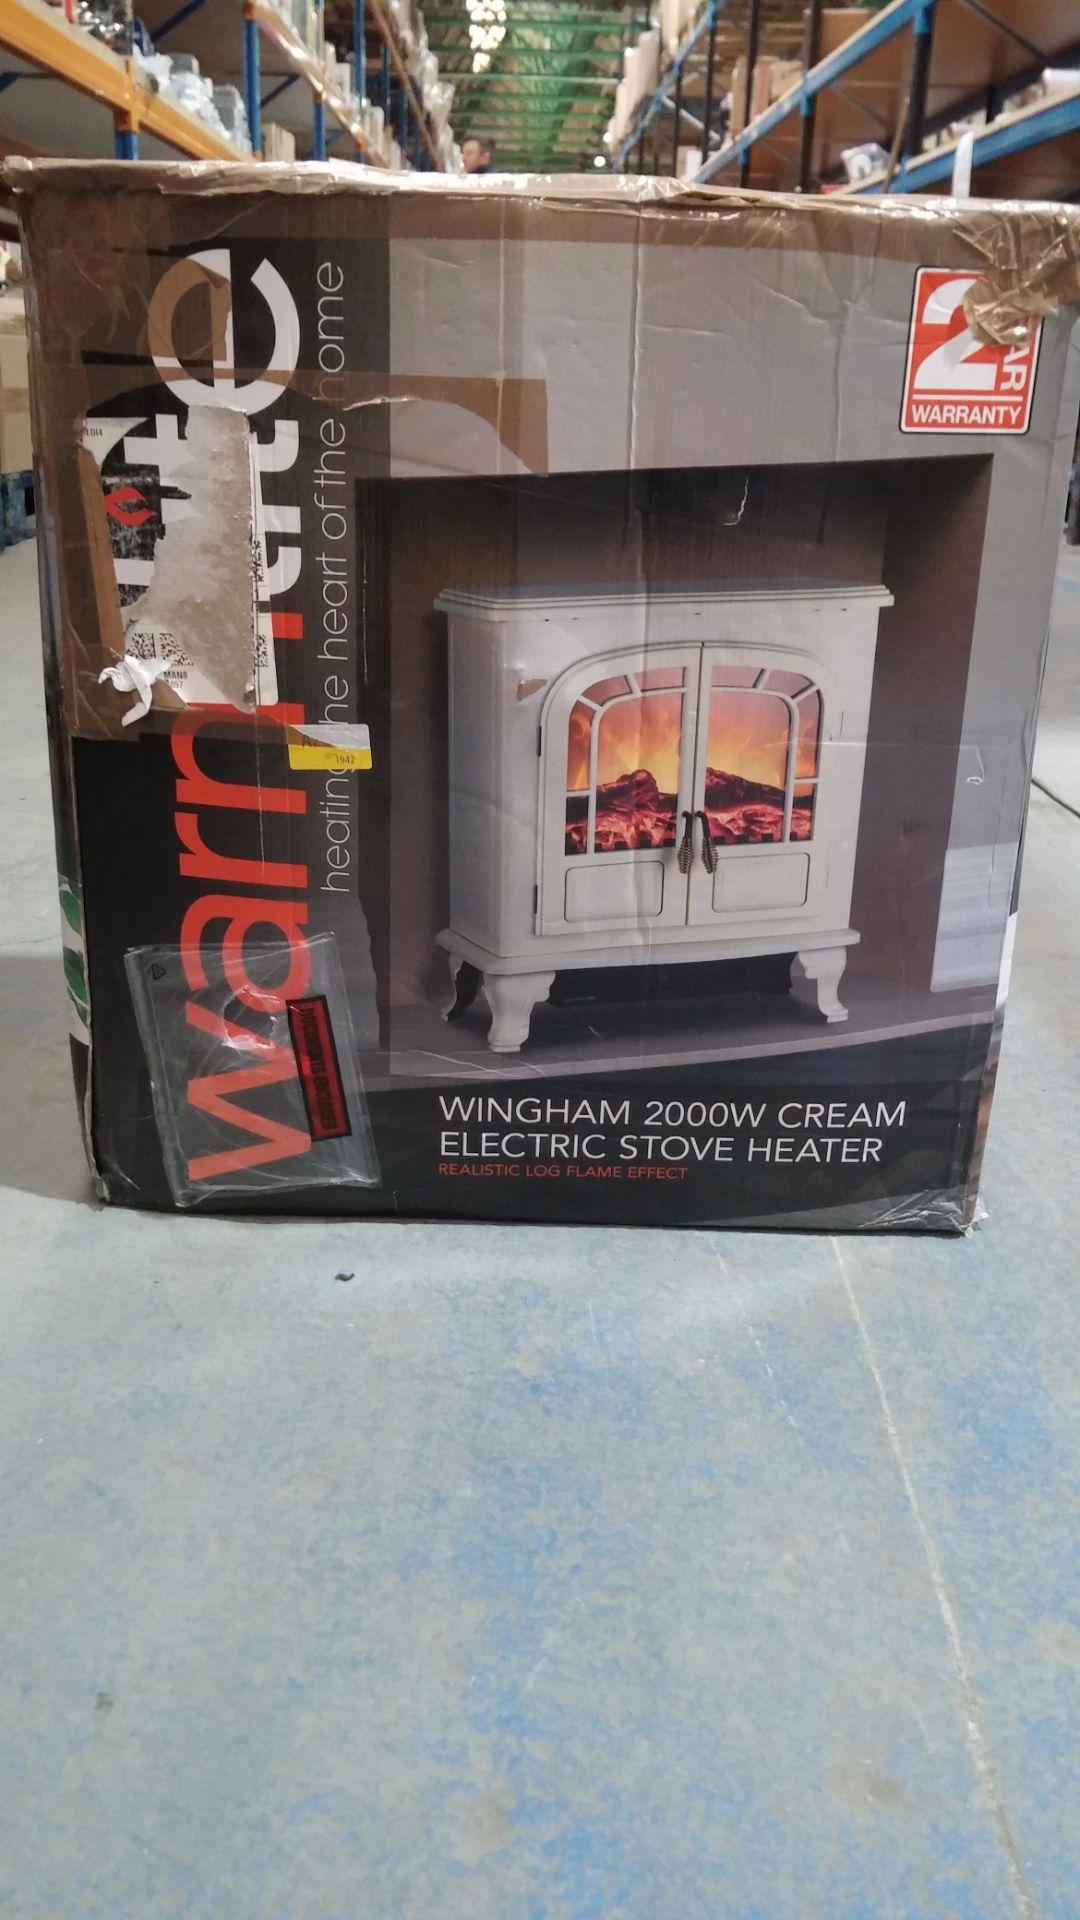 RRP £110 Boxed Warmlite Wingham 2000W Cream Electric Stove Heater